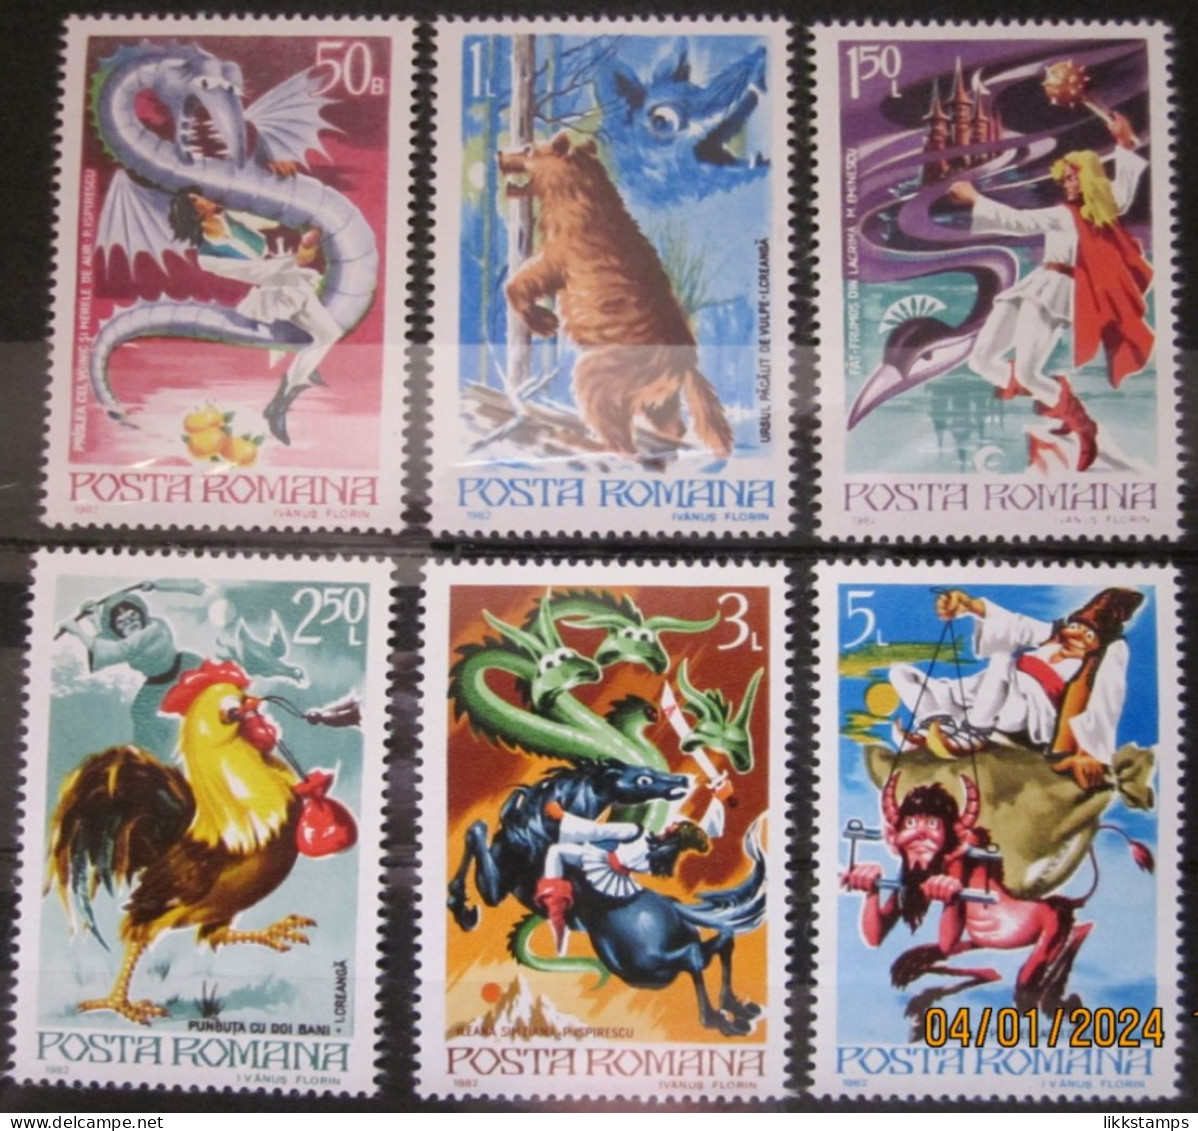 ROMANIA ~ 1982 ~ S.G. NUMBERS 4737 - 4742. ~ FAIRY TALES. ~ MNH #03548 - Neufs